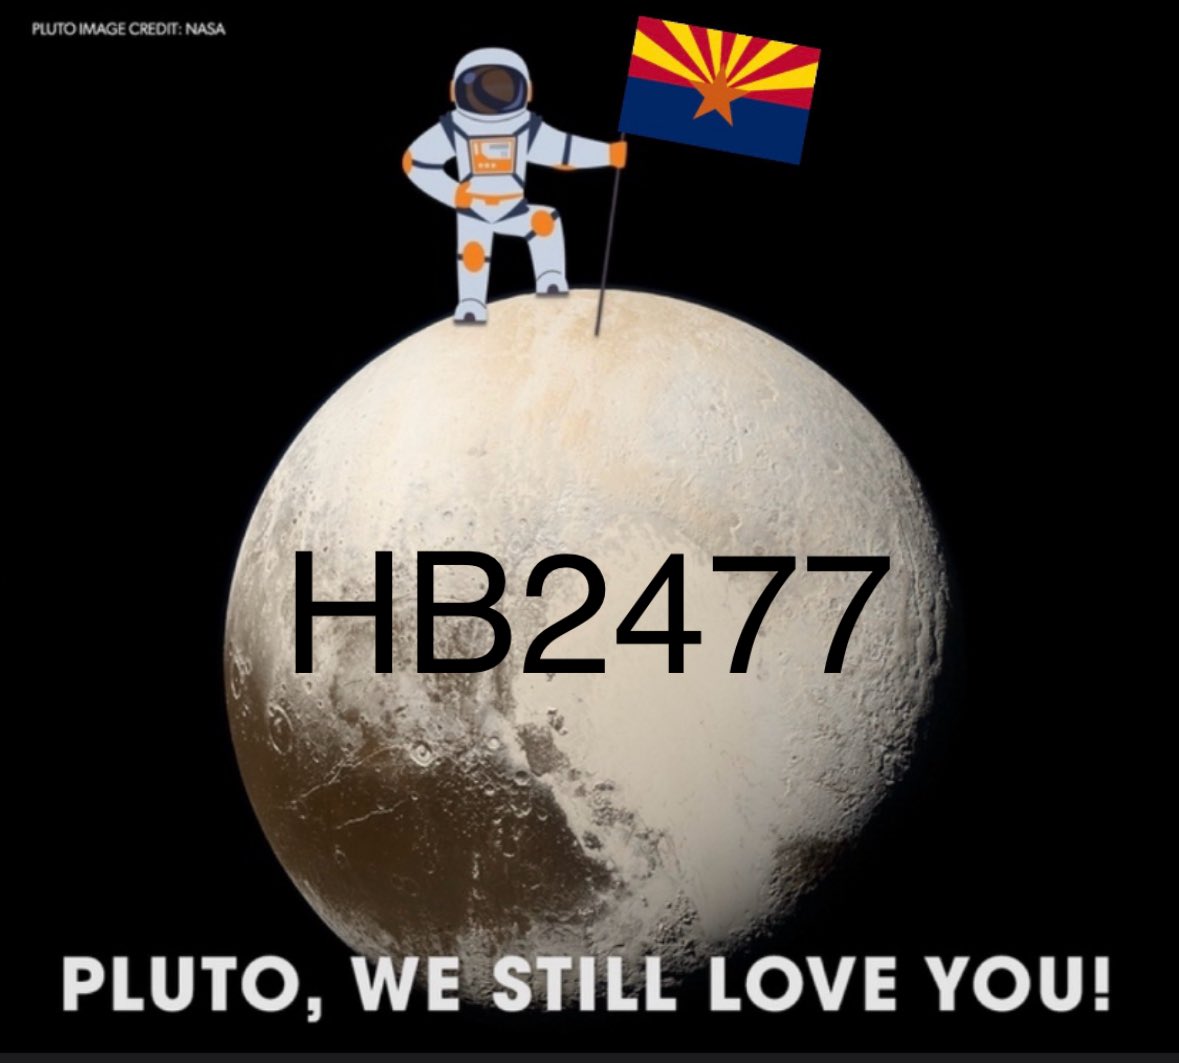 We in Arizona haven’t forgotten about you, Pluto. You were discovered in our grand state on this day back in 1930. And tomorrow, you’ll be one step closer to being Arizona’s state planet! #PlutoDay #HB2477 @LowellObs